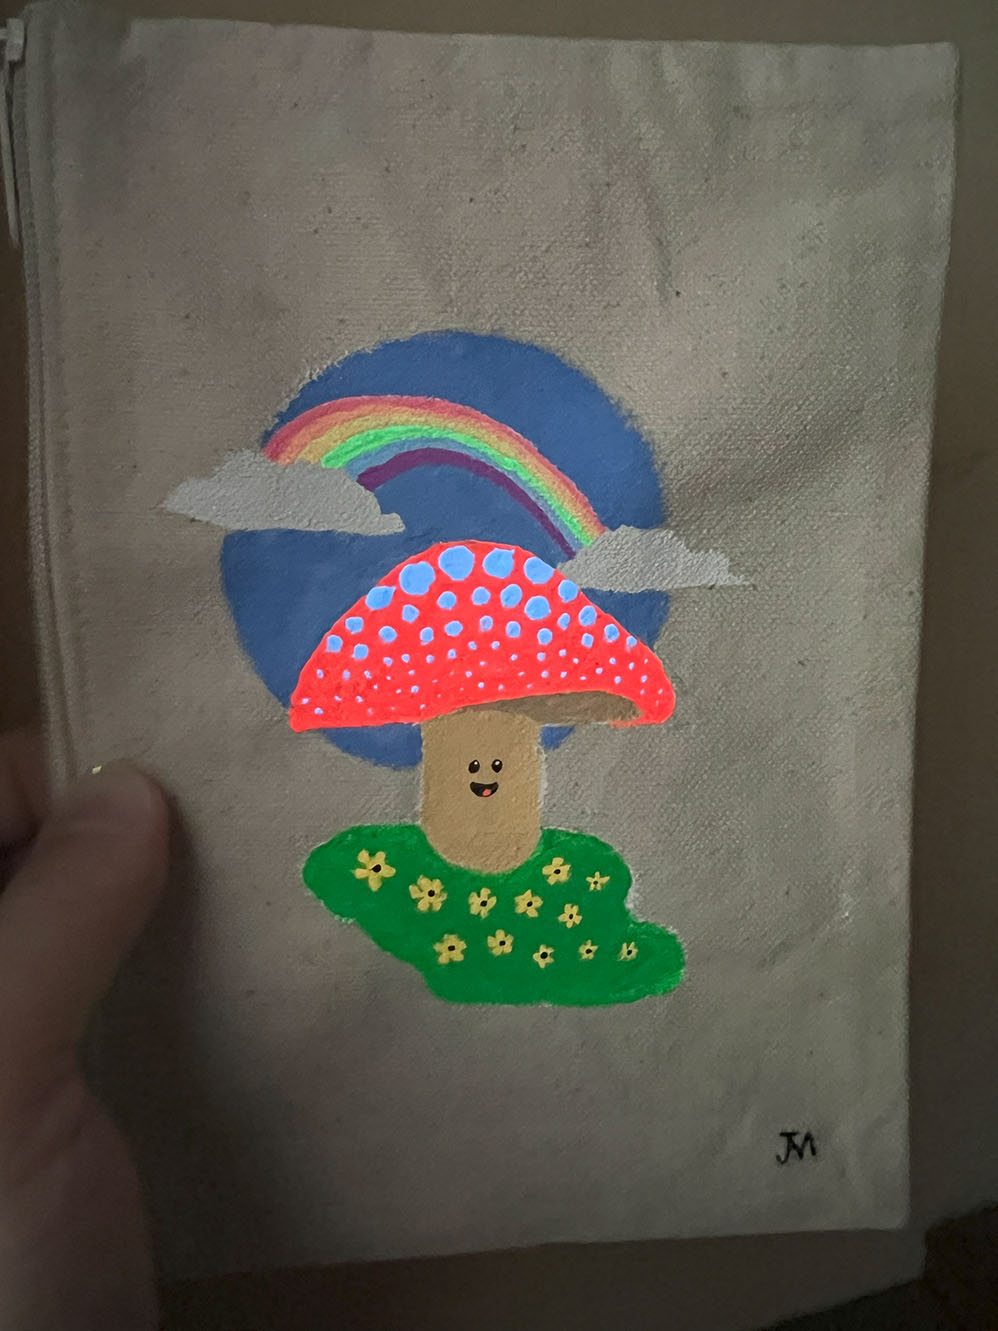 shroom pouch front glowing